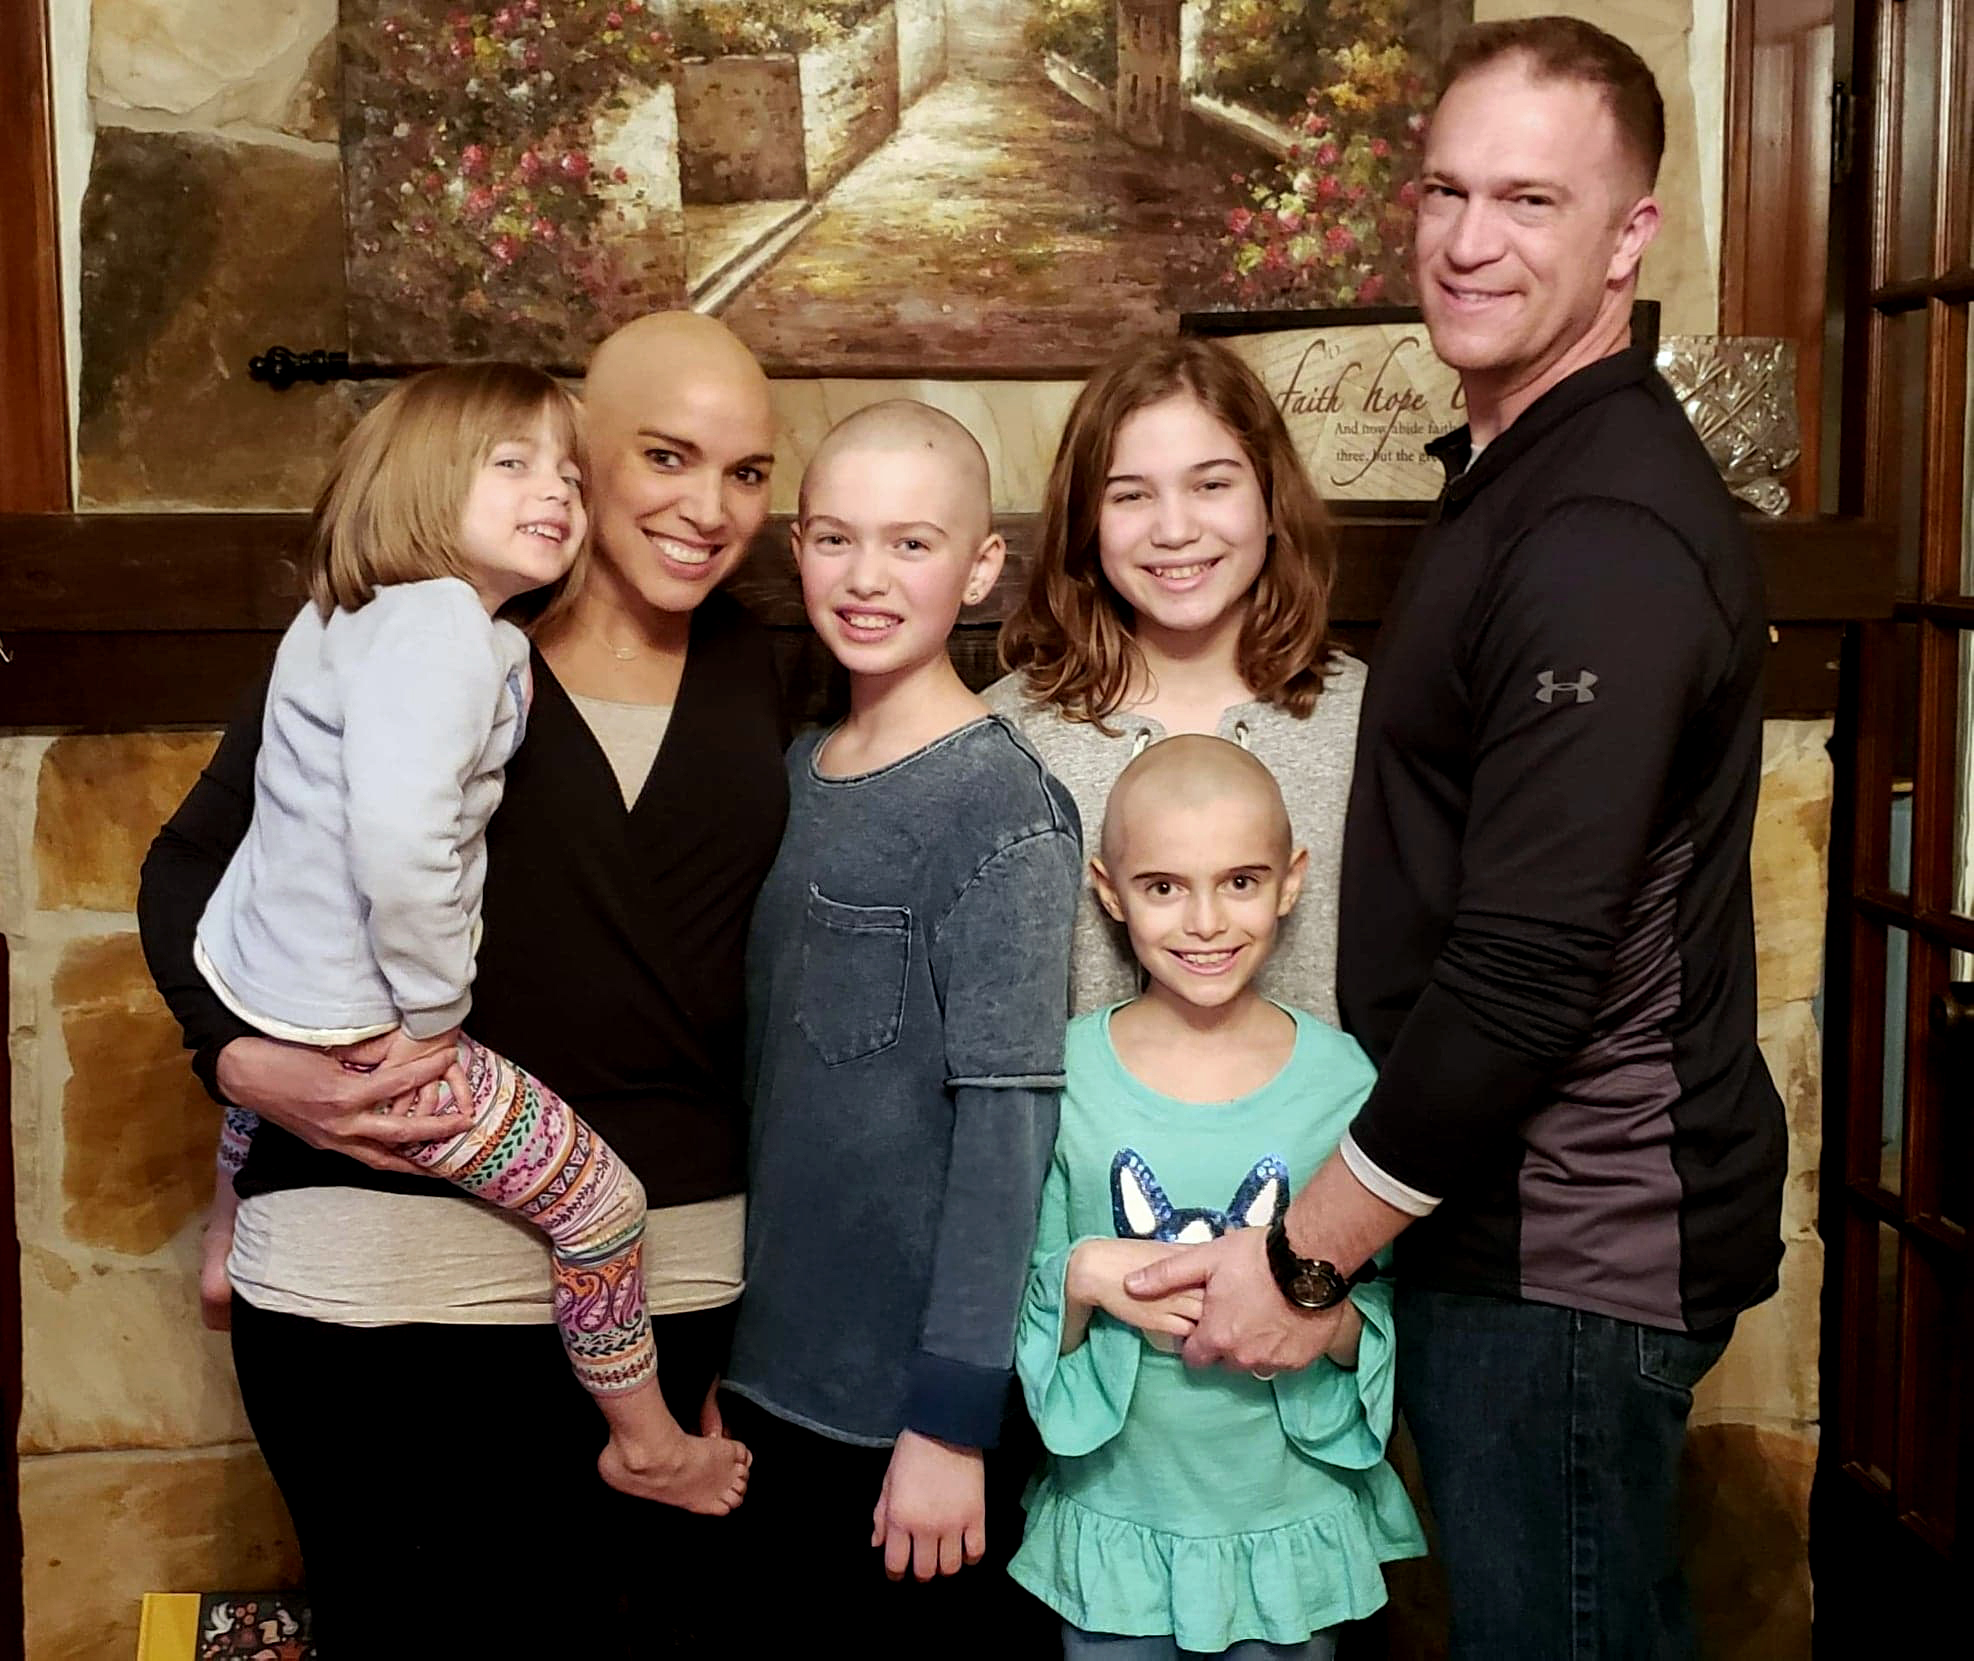 PHOTO: Joanna McPherson of Shreveport, Louisiana, is seen in Jan. 2019 with her husband, Shawn McPherson and their daughters Alexa, 11, Kayla, 10, Sophia, 7, and Jocelyn, 4.